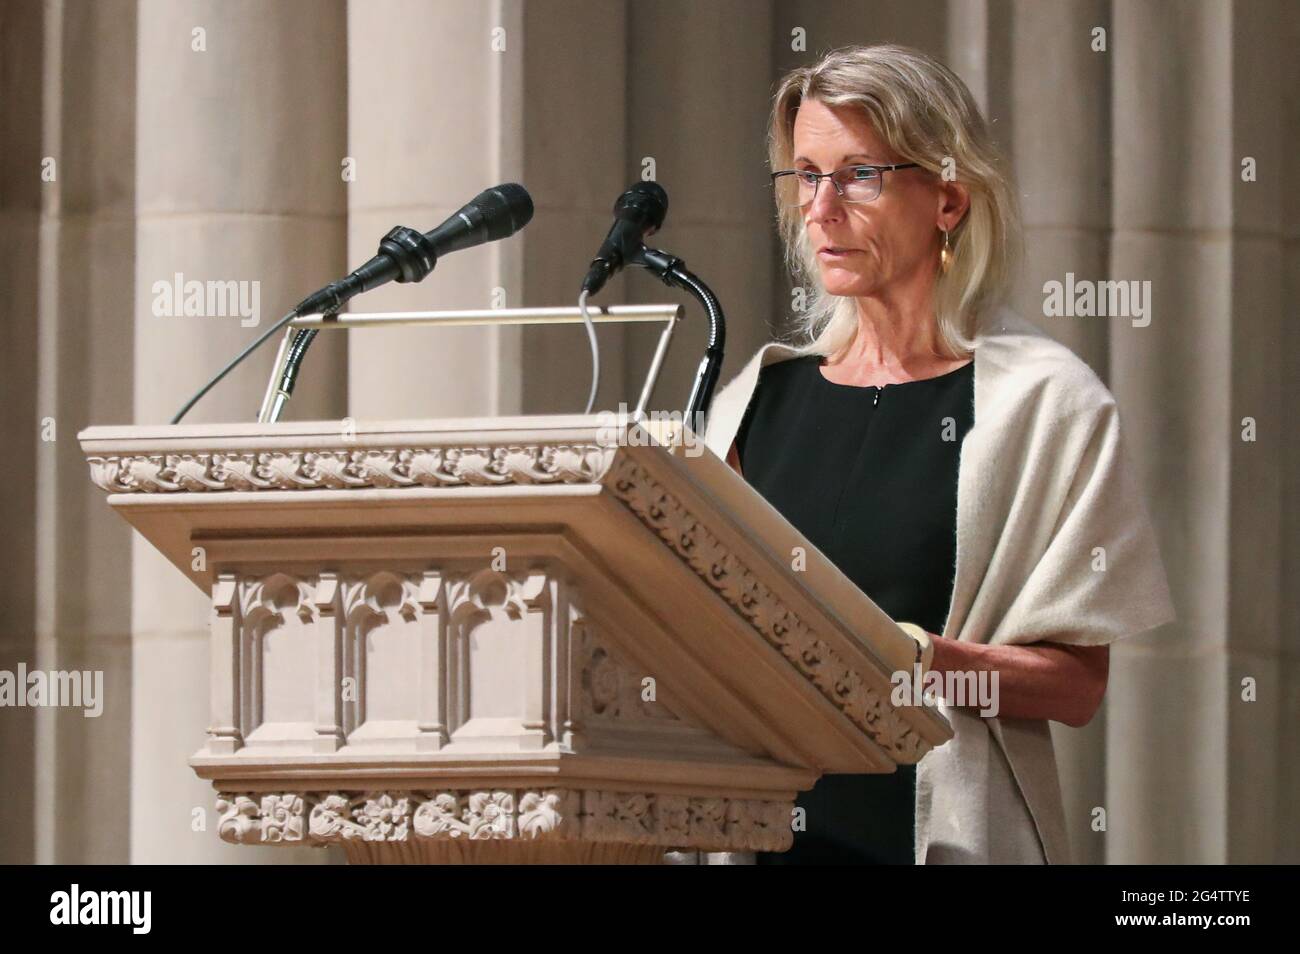 Mary Conover reads from Ecclesiastes 3:1-15 during the funeral ceremony of former Senator John Warner at Washington National Cathedral in Washington, DC, U.S. June 23, 2021. Oliver Contreras/Pool via REUTERS Stock Photo